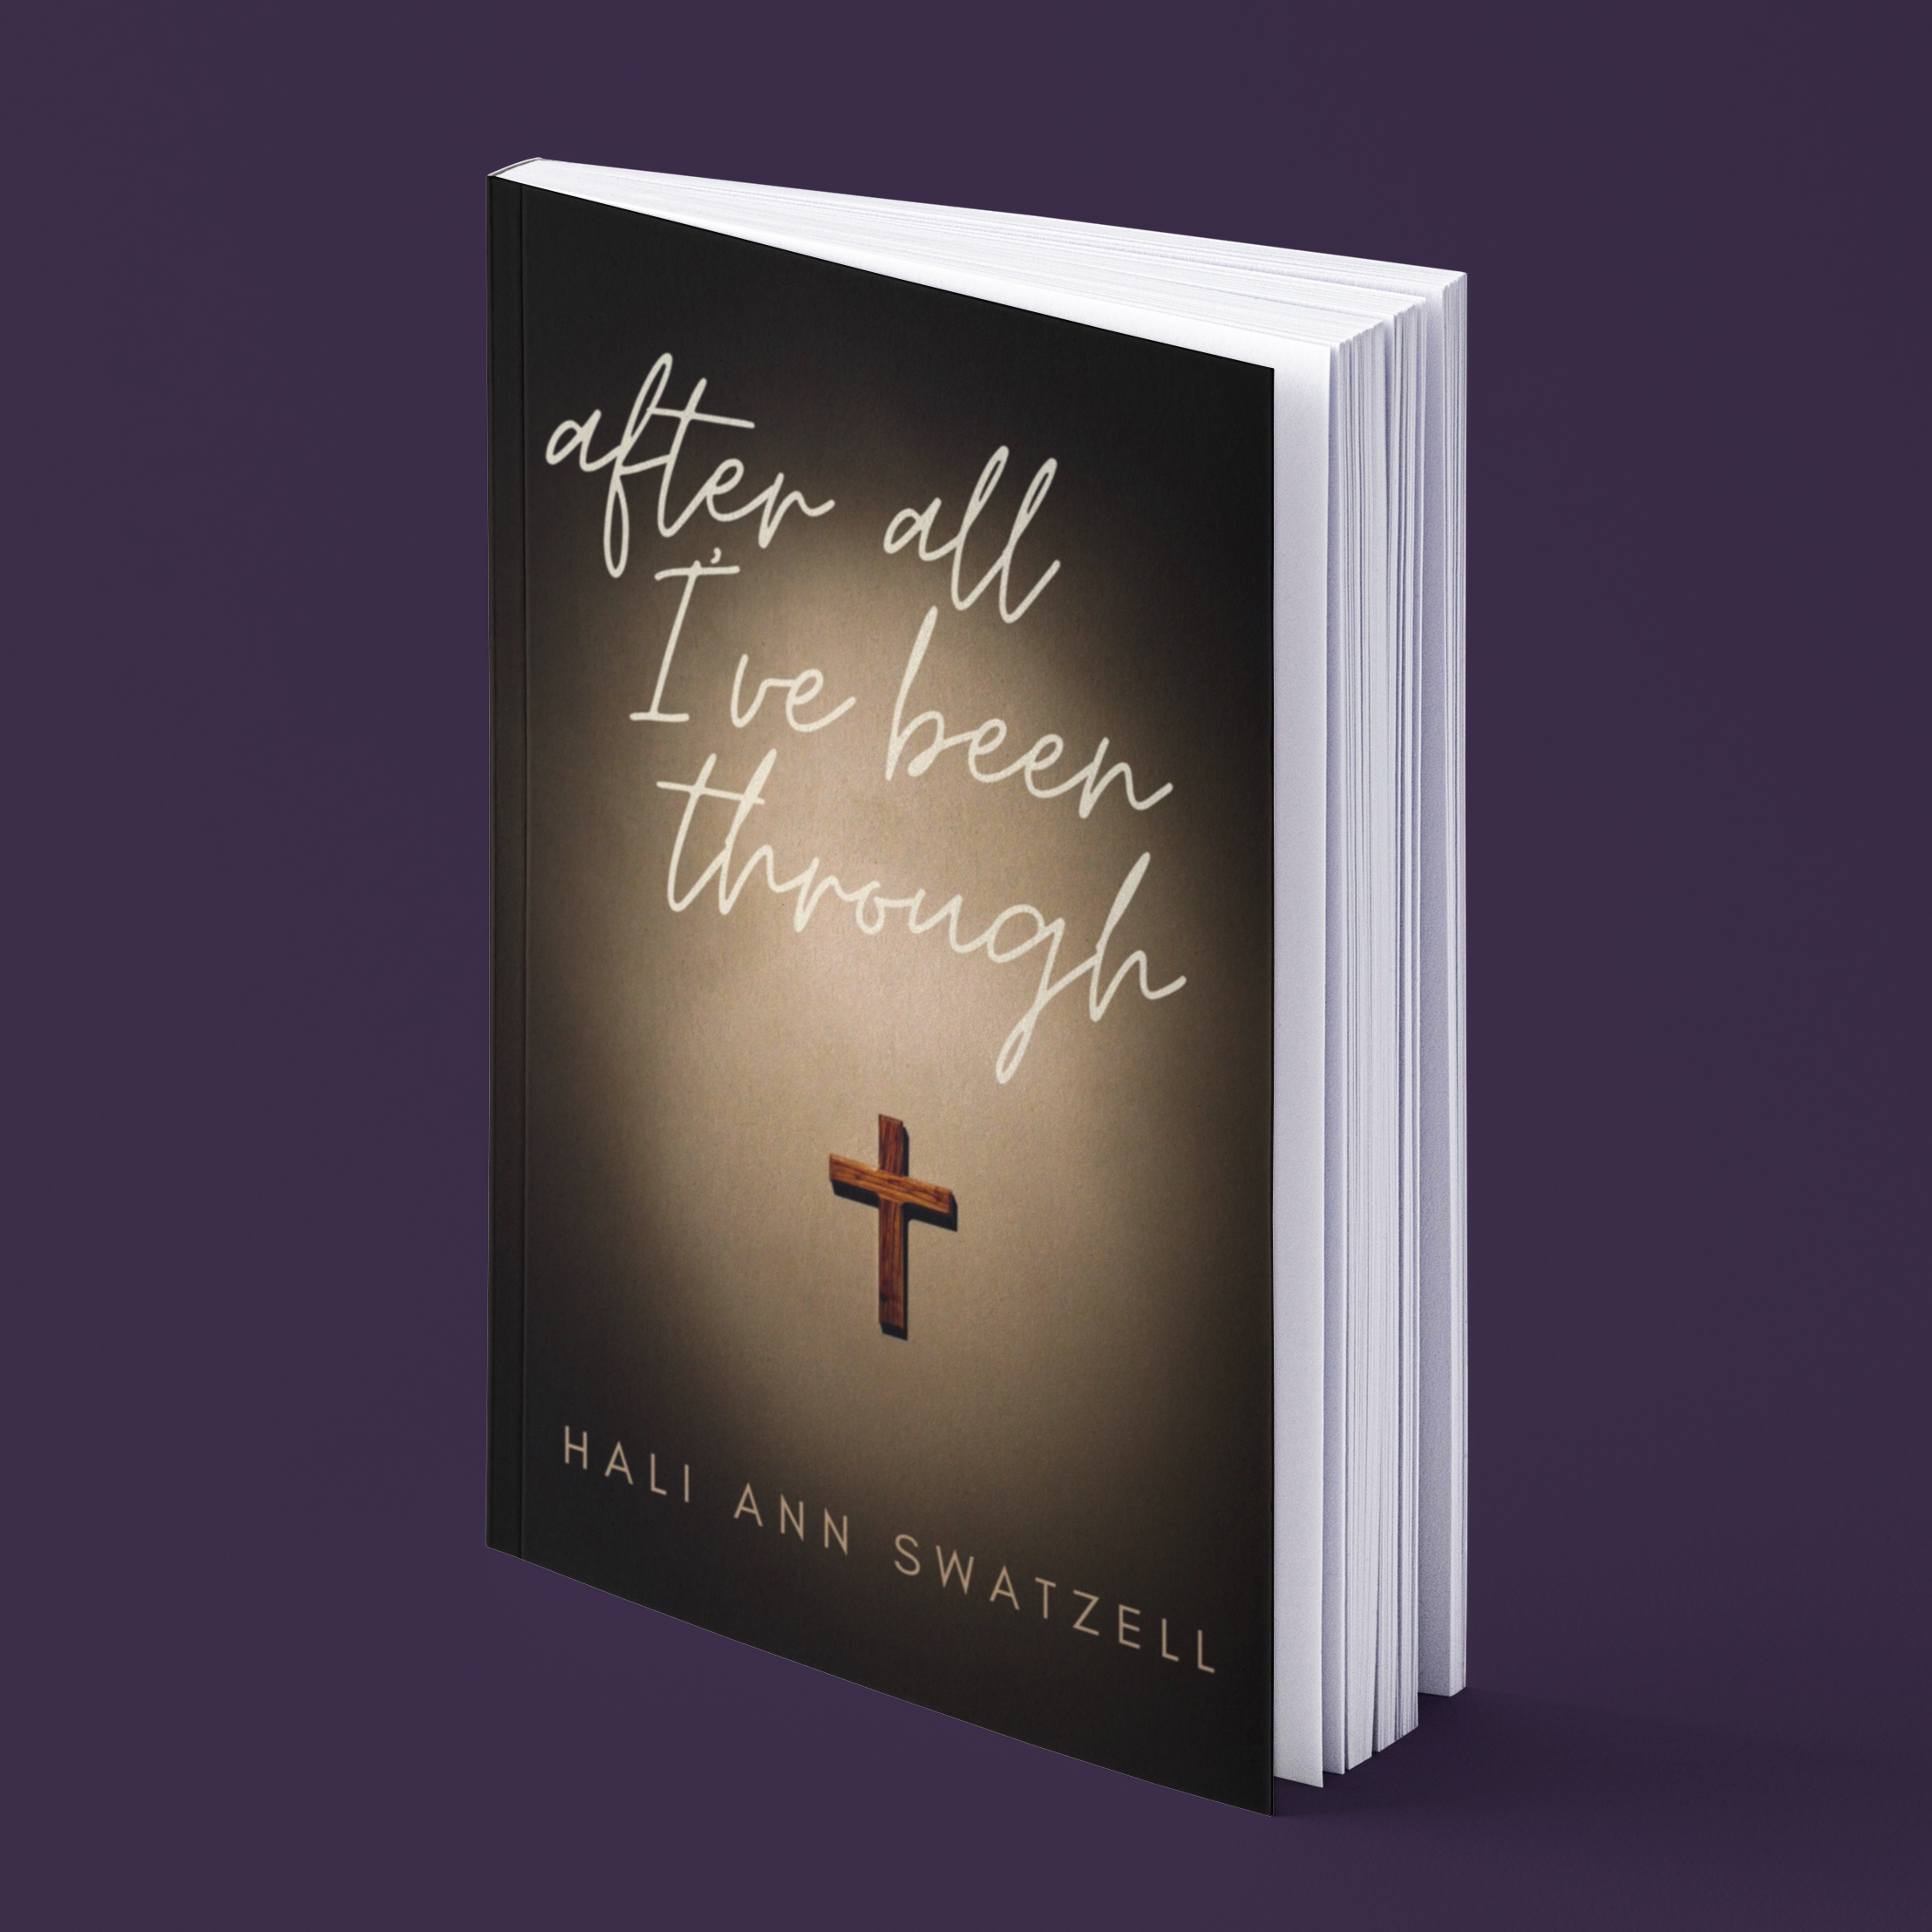 A sexual abuse survivor, Hali Ann Swatzell, shares the path to wholeness in her new book "After All I've Been Through"